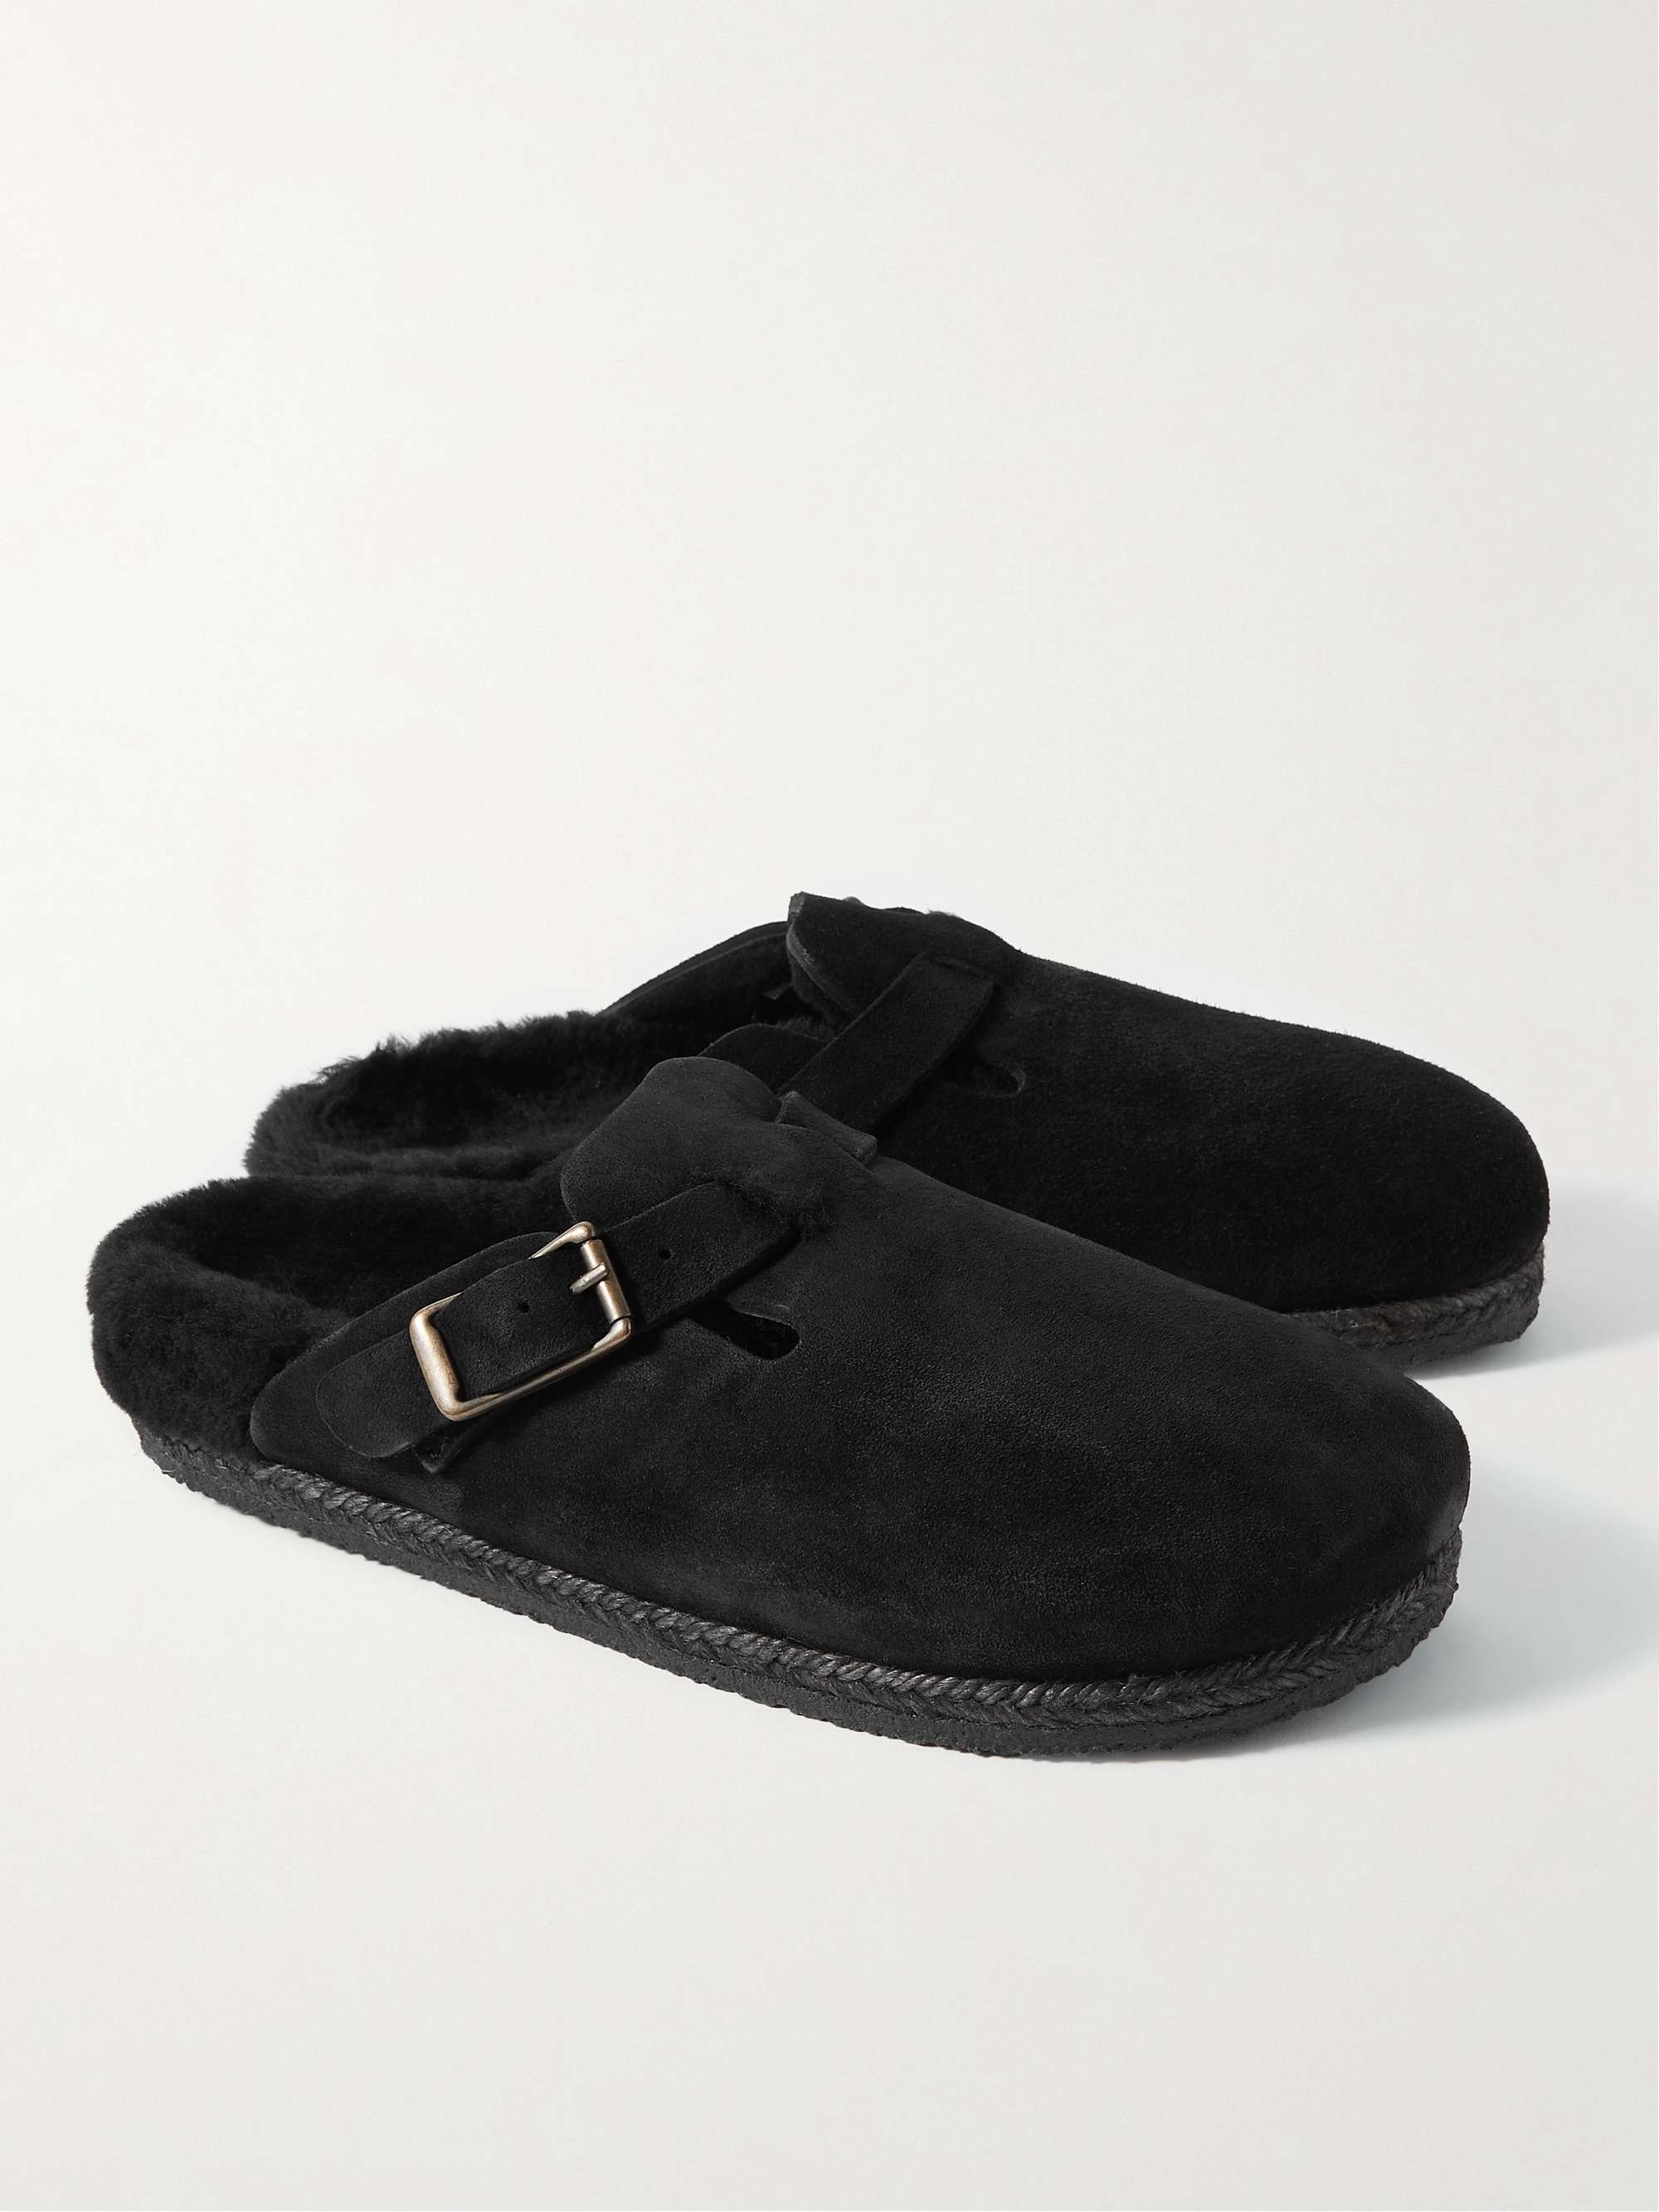 YUKETEN Sal-1 Shearling-Lined Suede Sandals